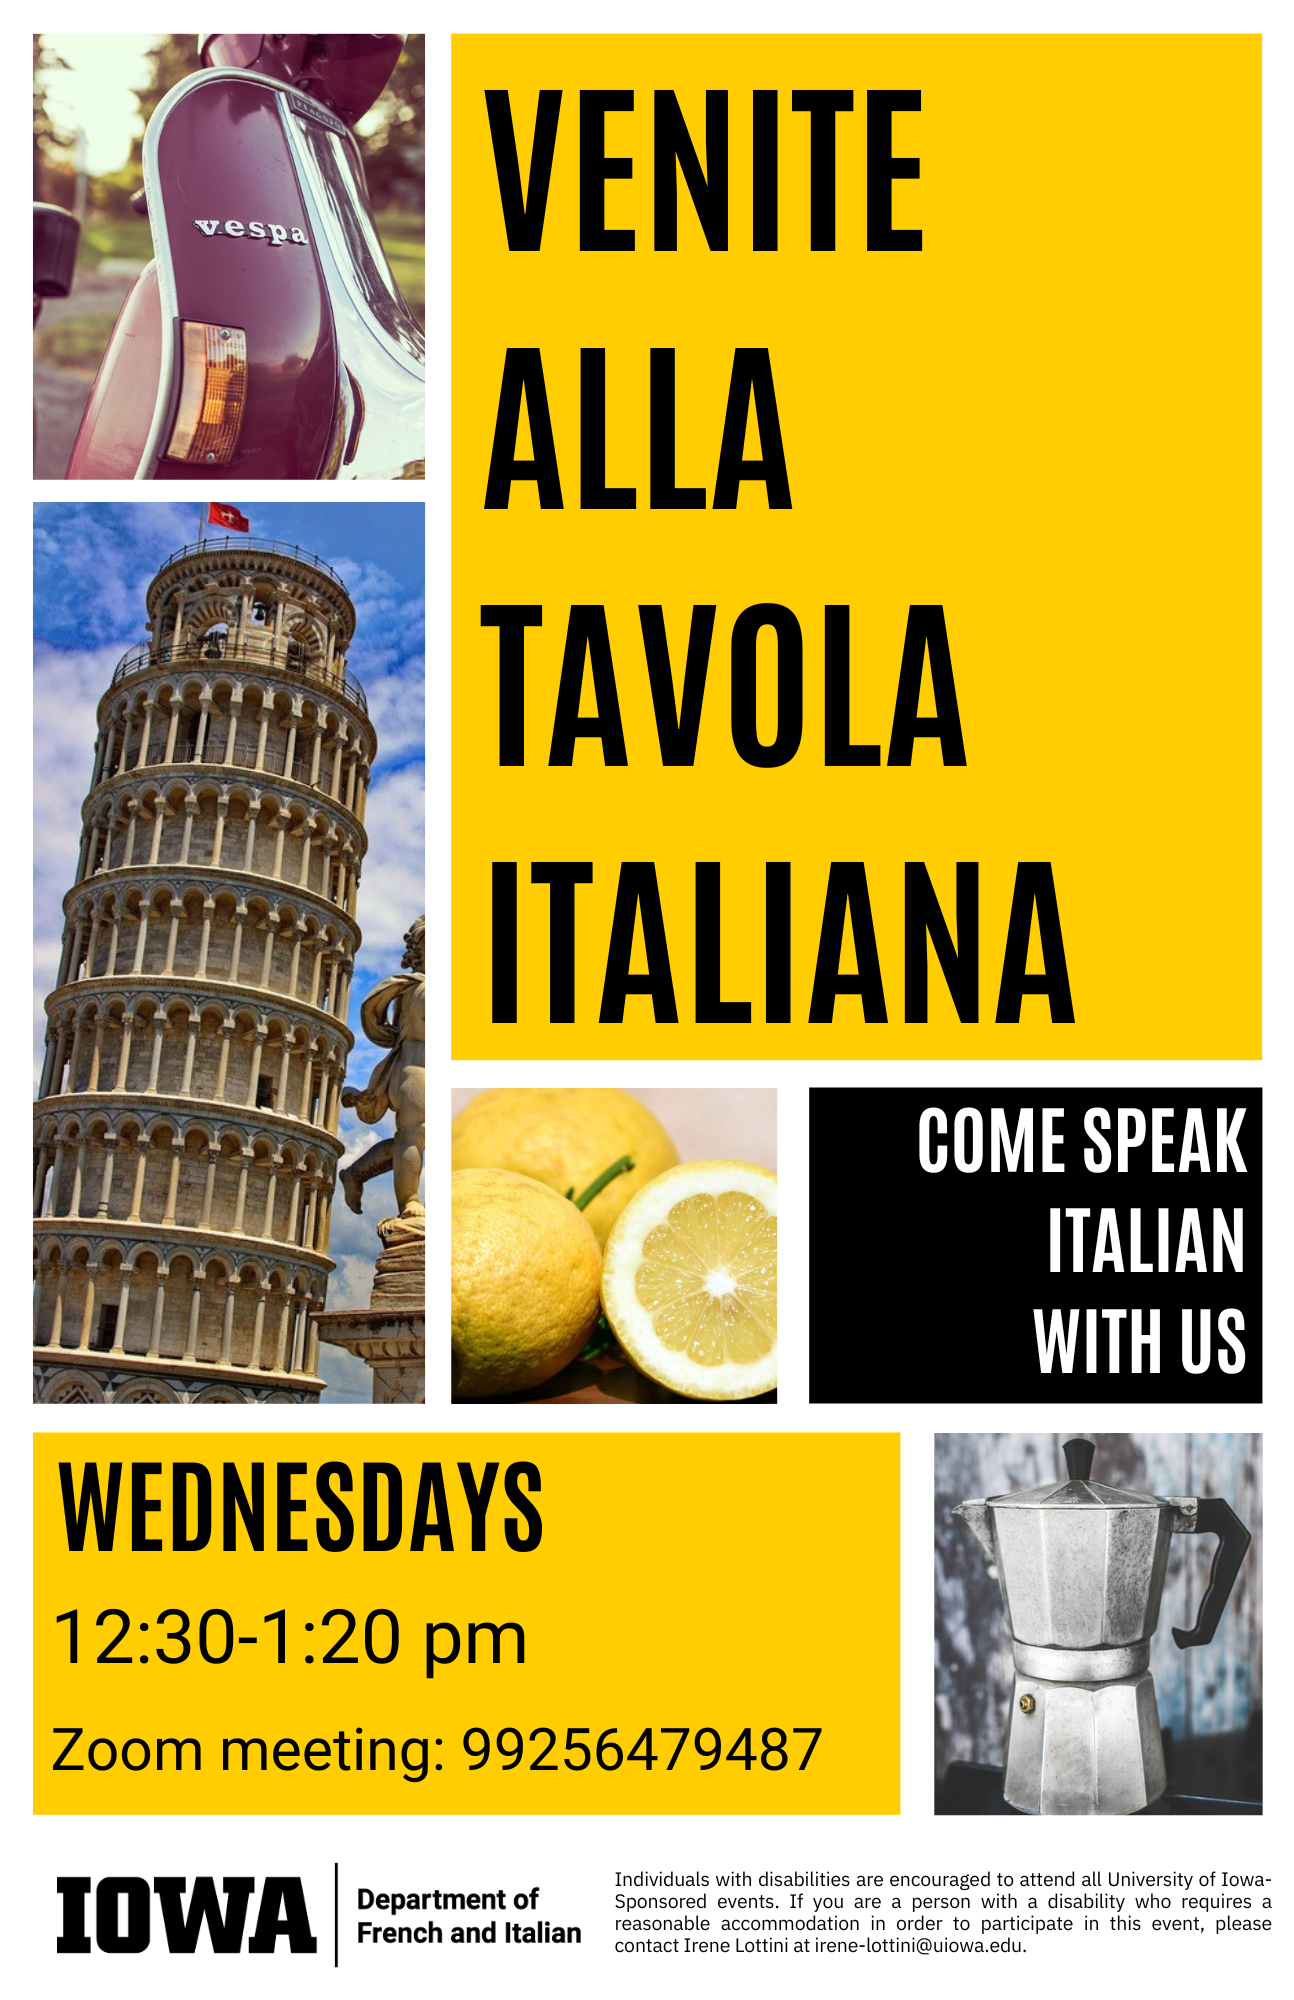 Come speak Italian with us! Wednesdays from 12:30 to 1:20 pm; Zoom meeting number 99256479487